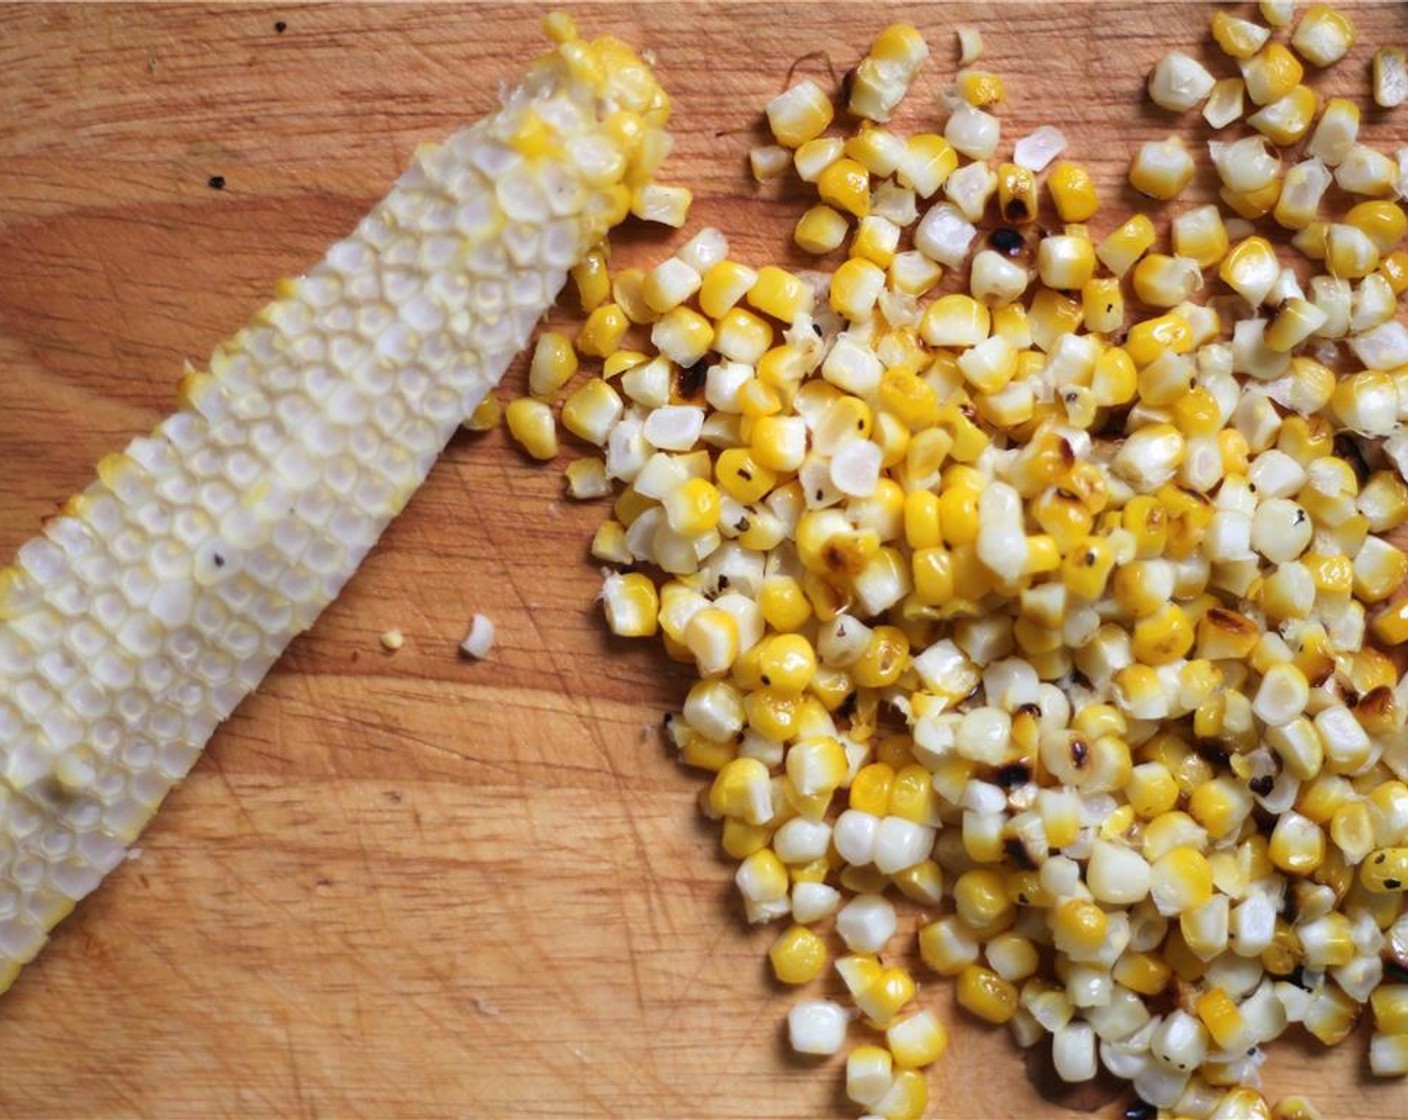 step 4 When the corn is cool enough to handle, slowly cut the kernels off the cob over a large bowl or cutting board.  Be warned that kernels will want to fly, so cut slowly.  Combine roasted kernels with the other chopped vegetables and Ground Cumin (1/4 tsp), Ground Coriander (1/4 tsp), and Cayenne Pepper (1/4 tsp).